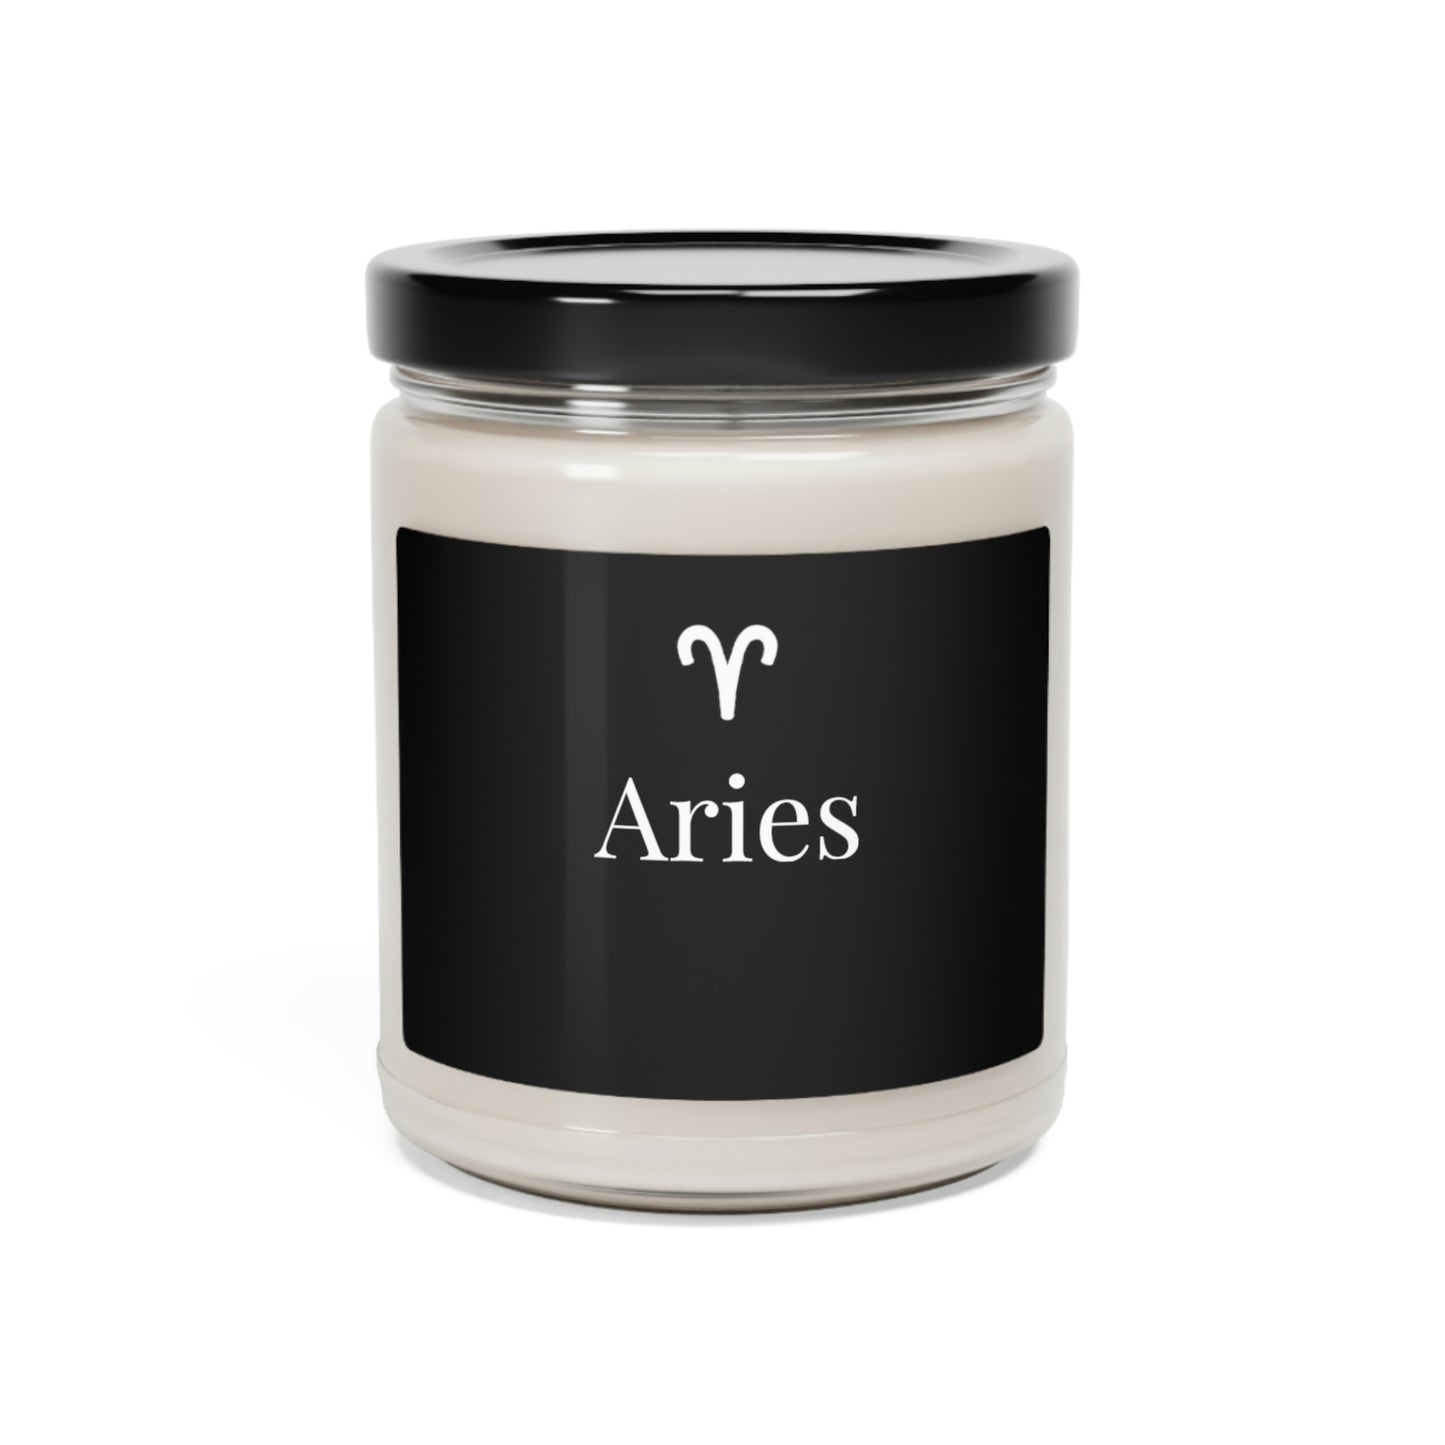 Aries Scented Candle